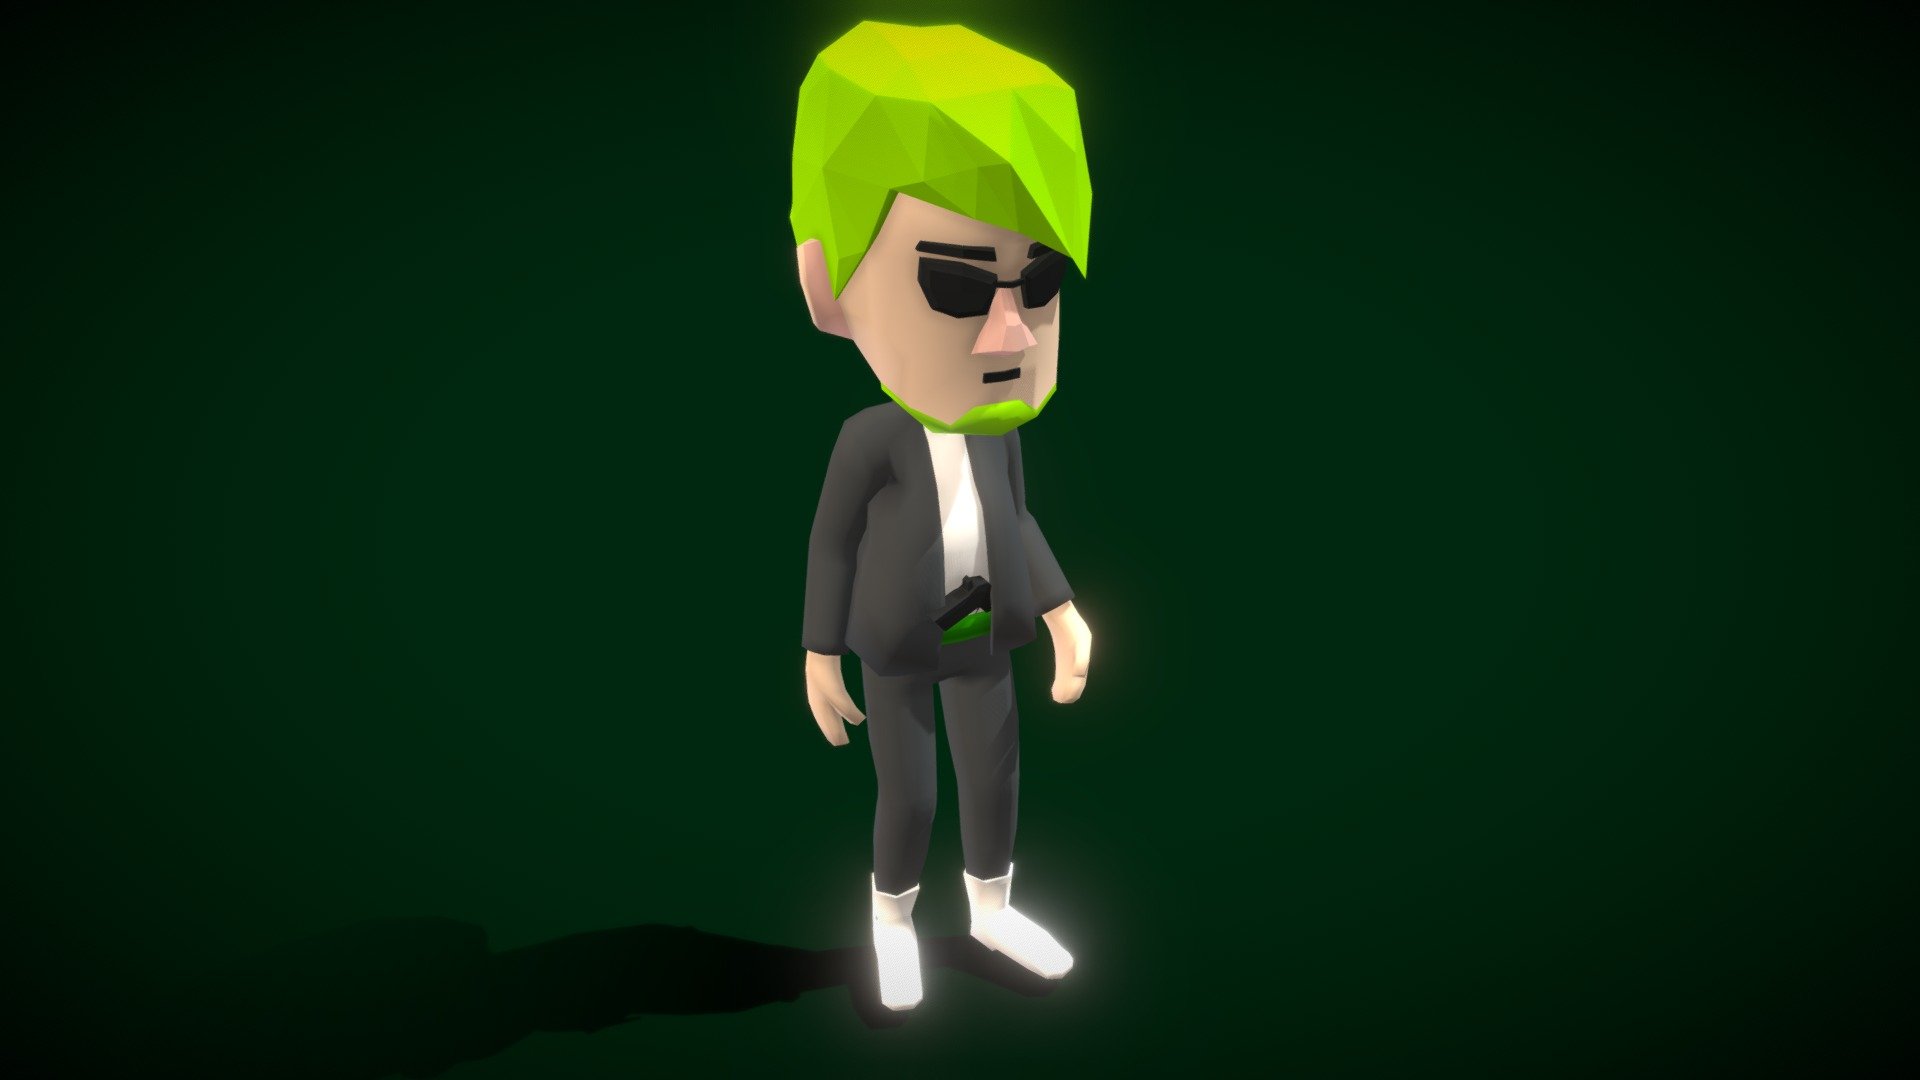 This is polys the mini cartoon character !
He is rigged bone and animations: Ilde, Walk ,Run
V5_Char 05 : 1319 polys/1299Vert/2408Tris
Let him at it! - V5 Char05 - Buy Royalty Free 3D model by V5 (@sakurav) 3d model